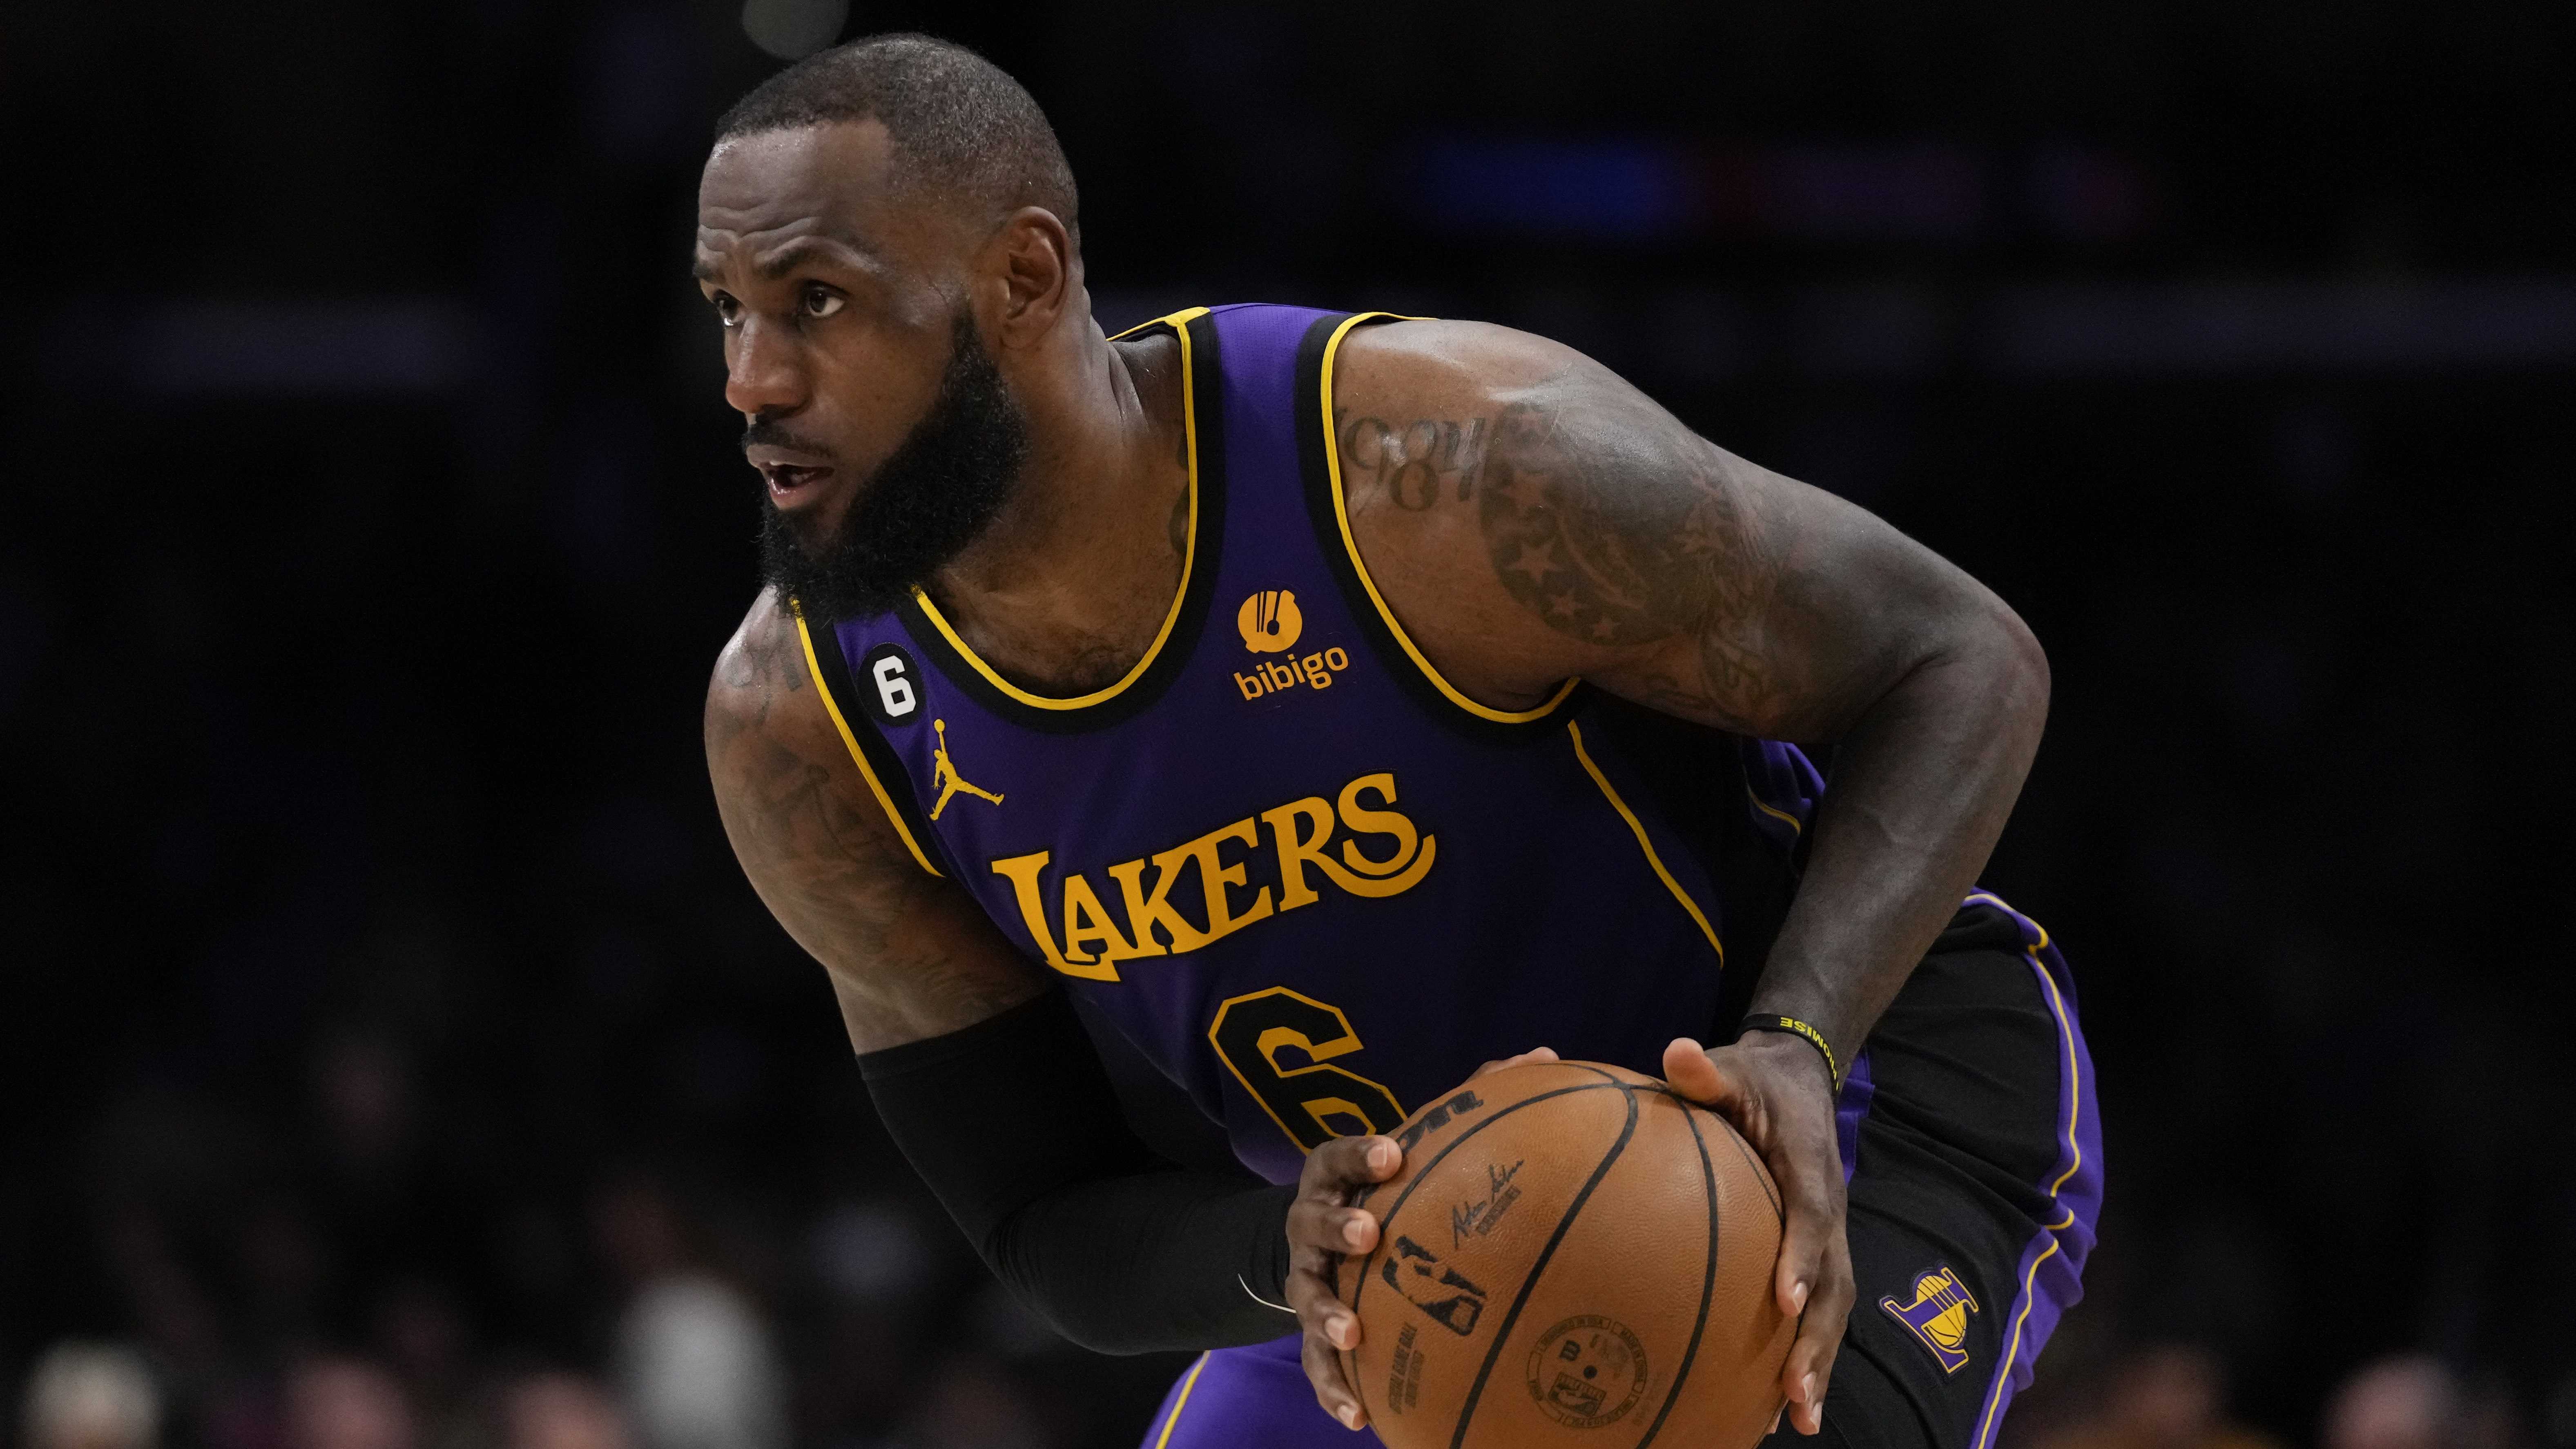 Memphis Grizzlies vs Los Angeles Lakers Jan 20, 2023 Play-by-Play